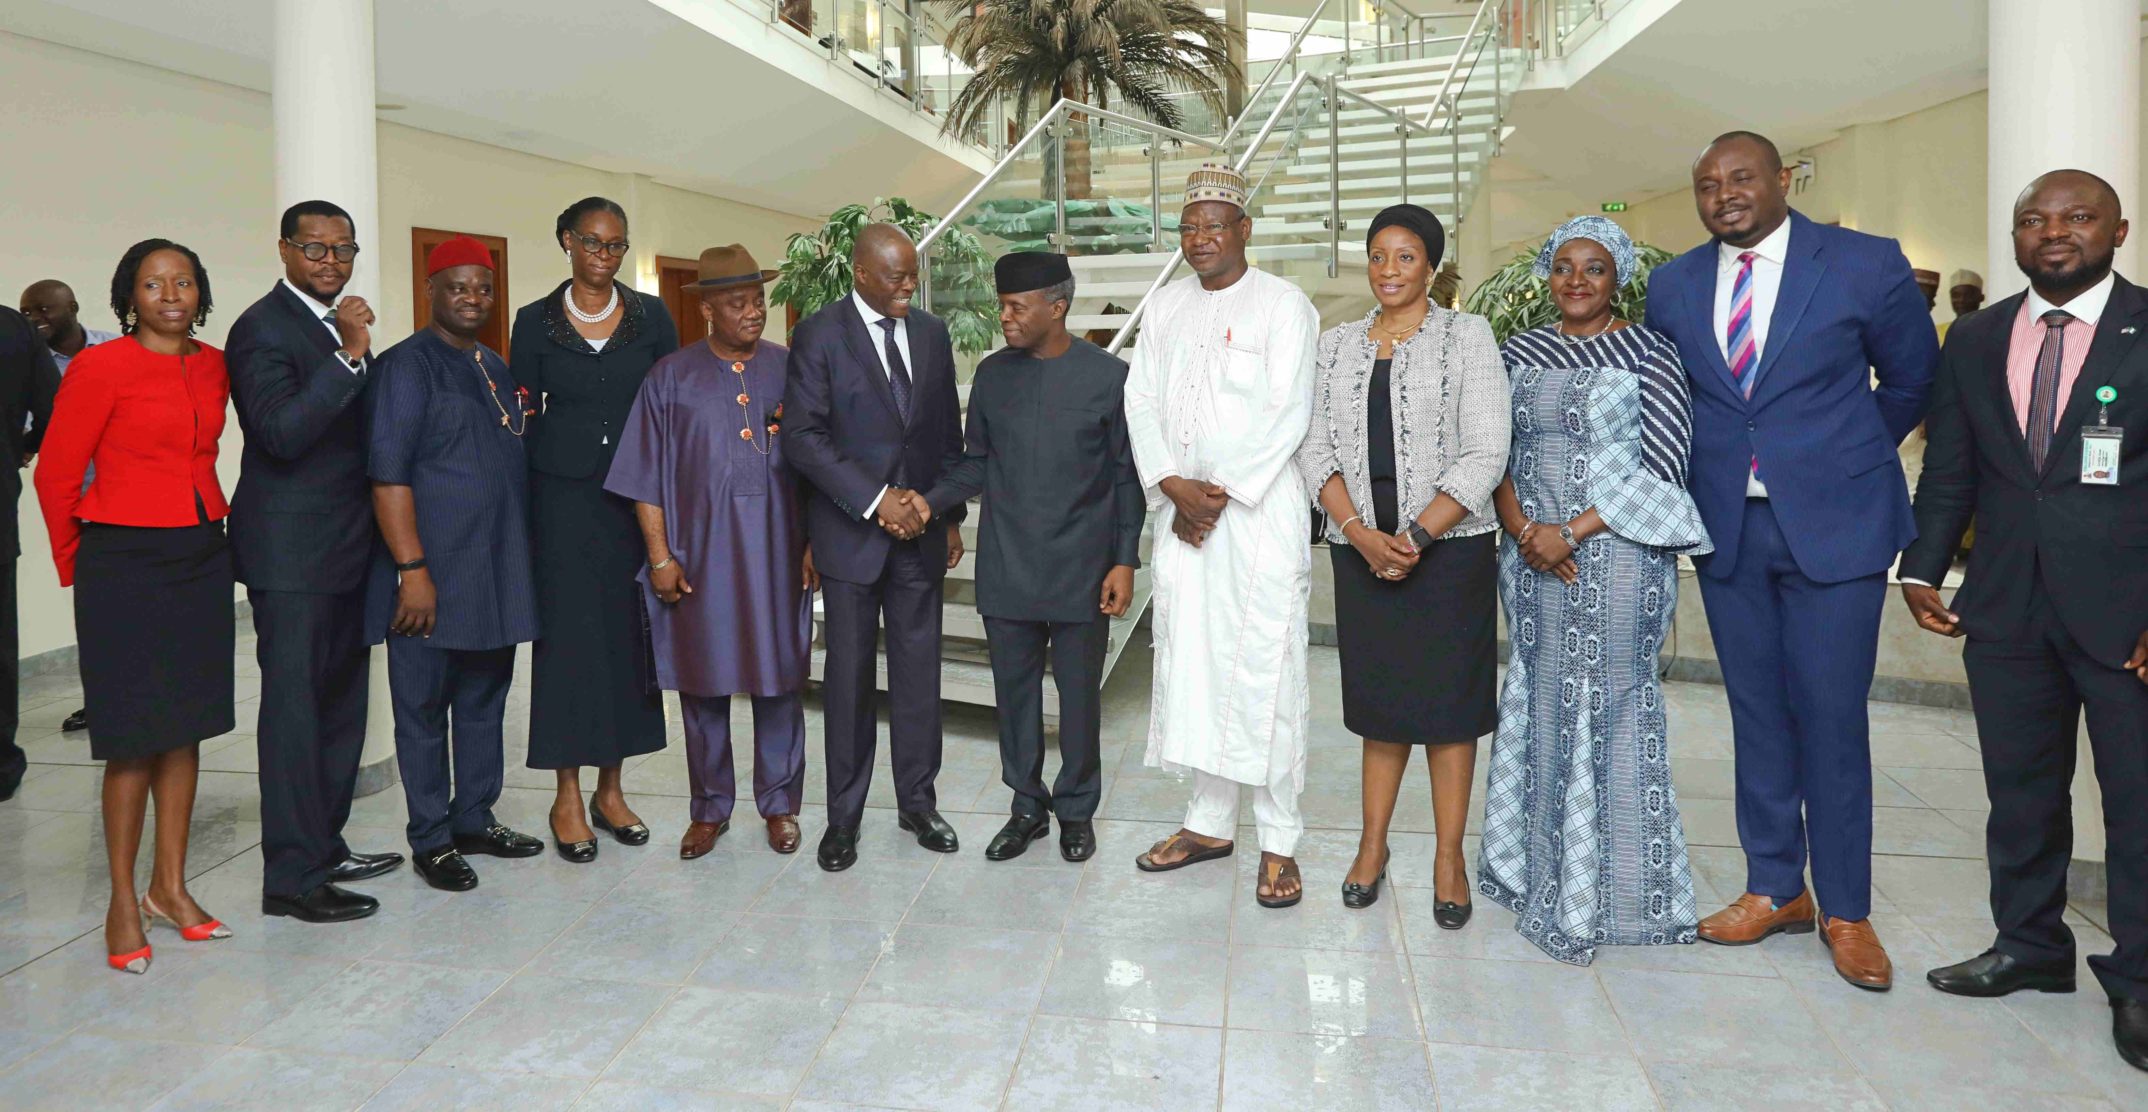 PHOTOS OF THE DAY: Ogoni Trust Fund Escrow Agreement signed in Abuja